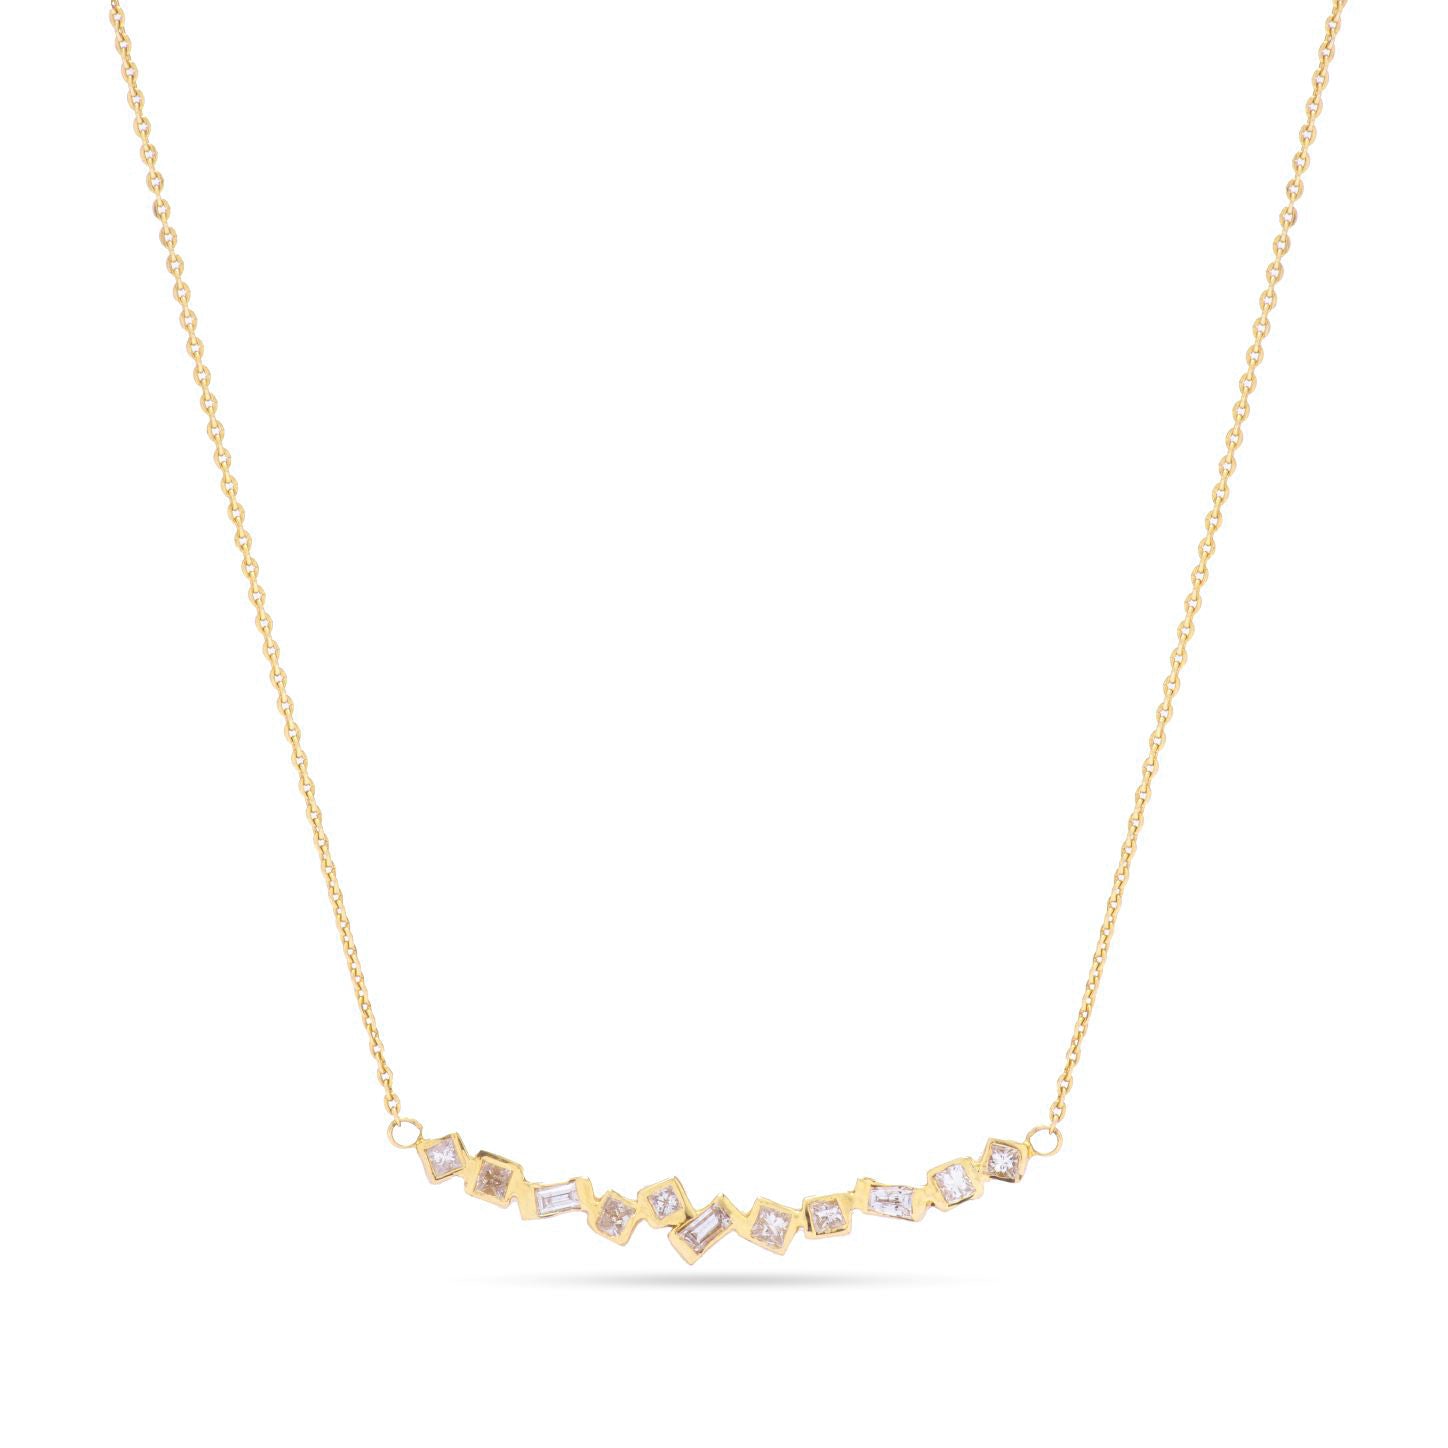 Baguette and princess diamond necklace in 18k rose gold - SIR1329